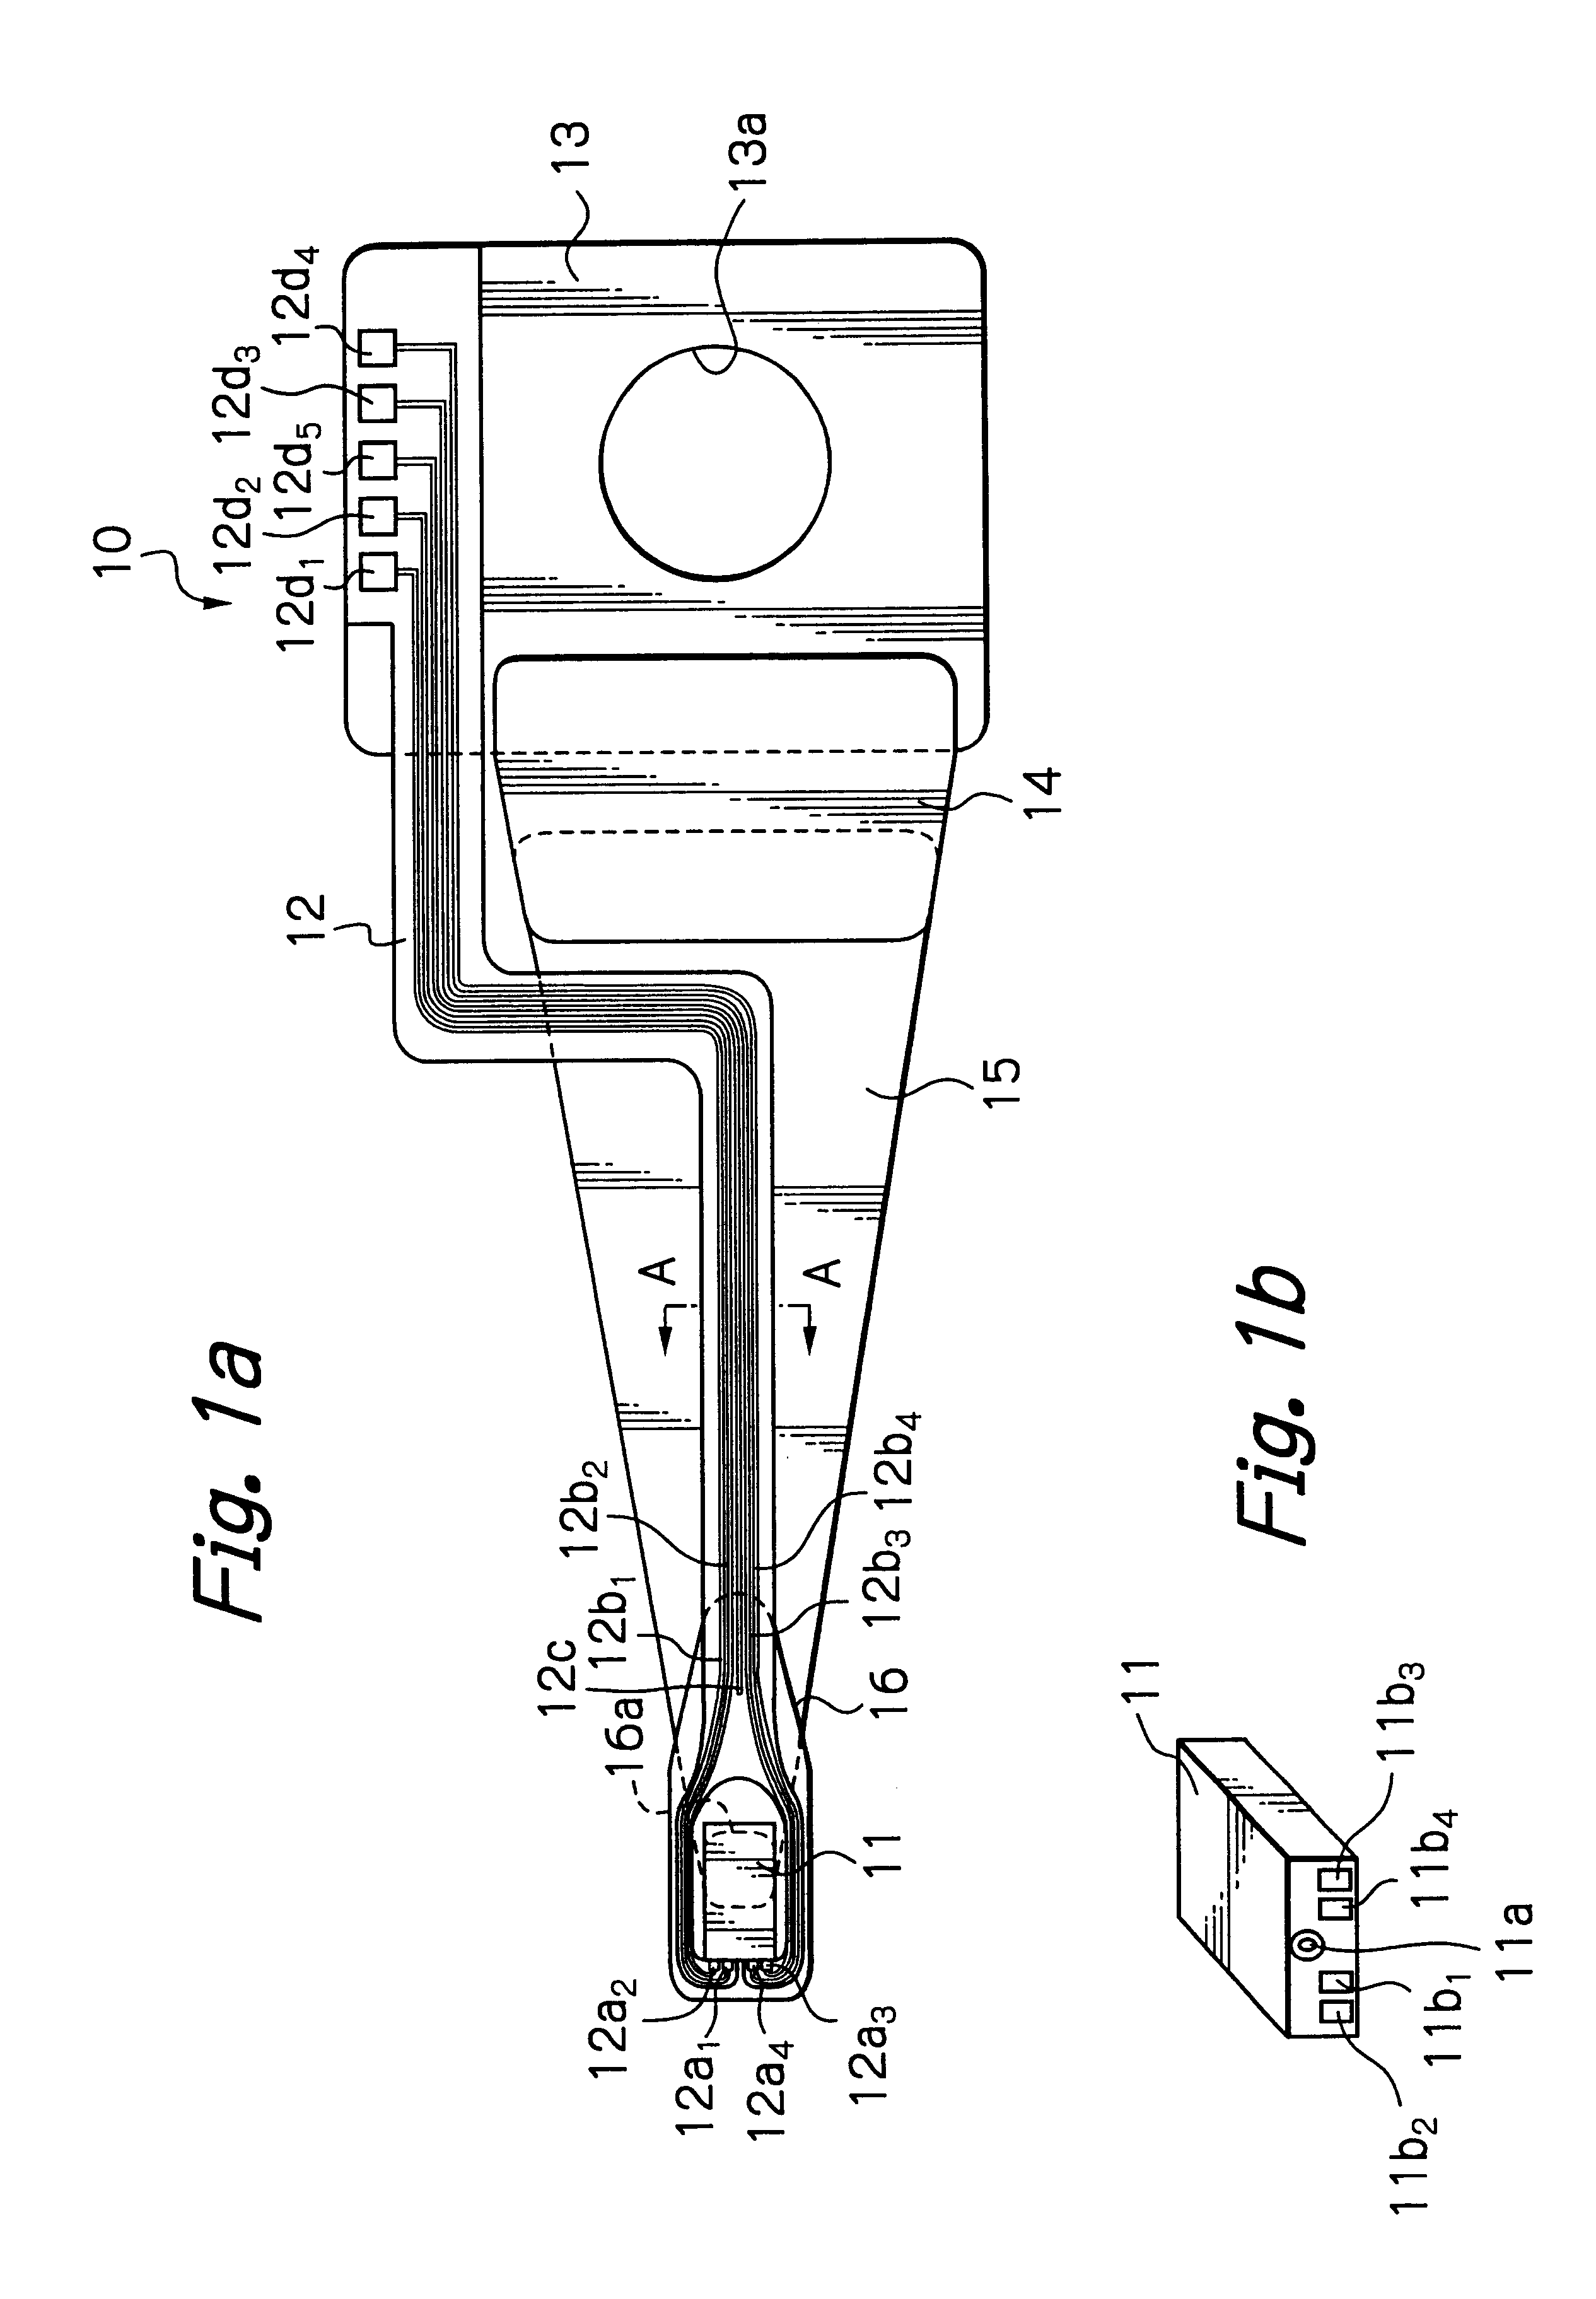 Head gimbal assembly with a ground or source voltage lead conductor